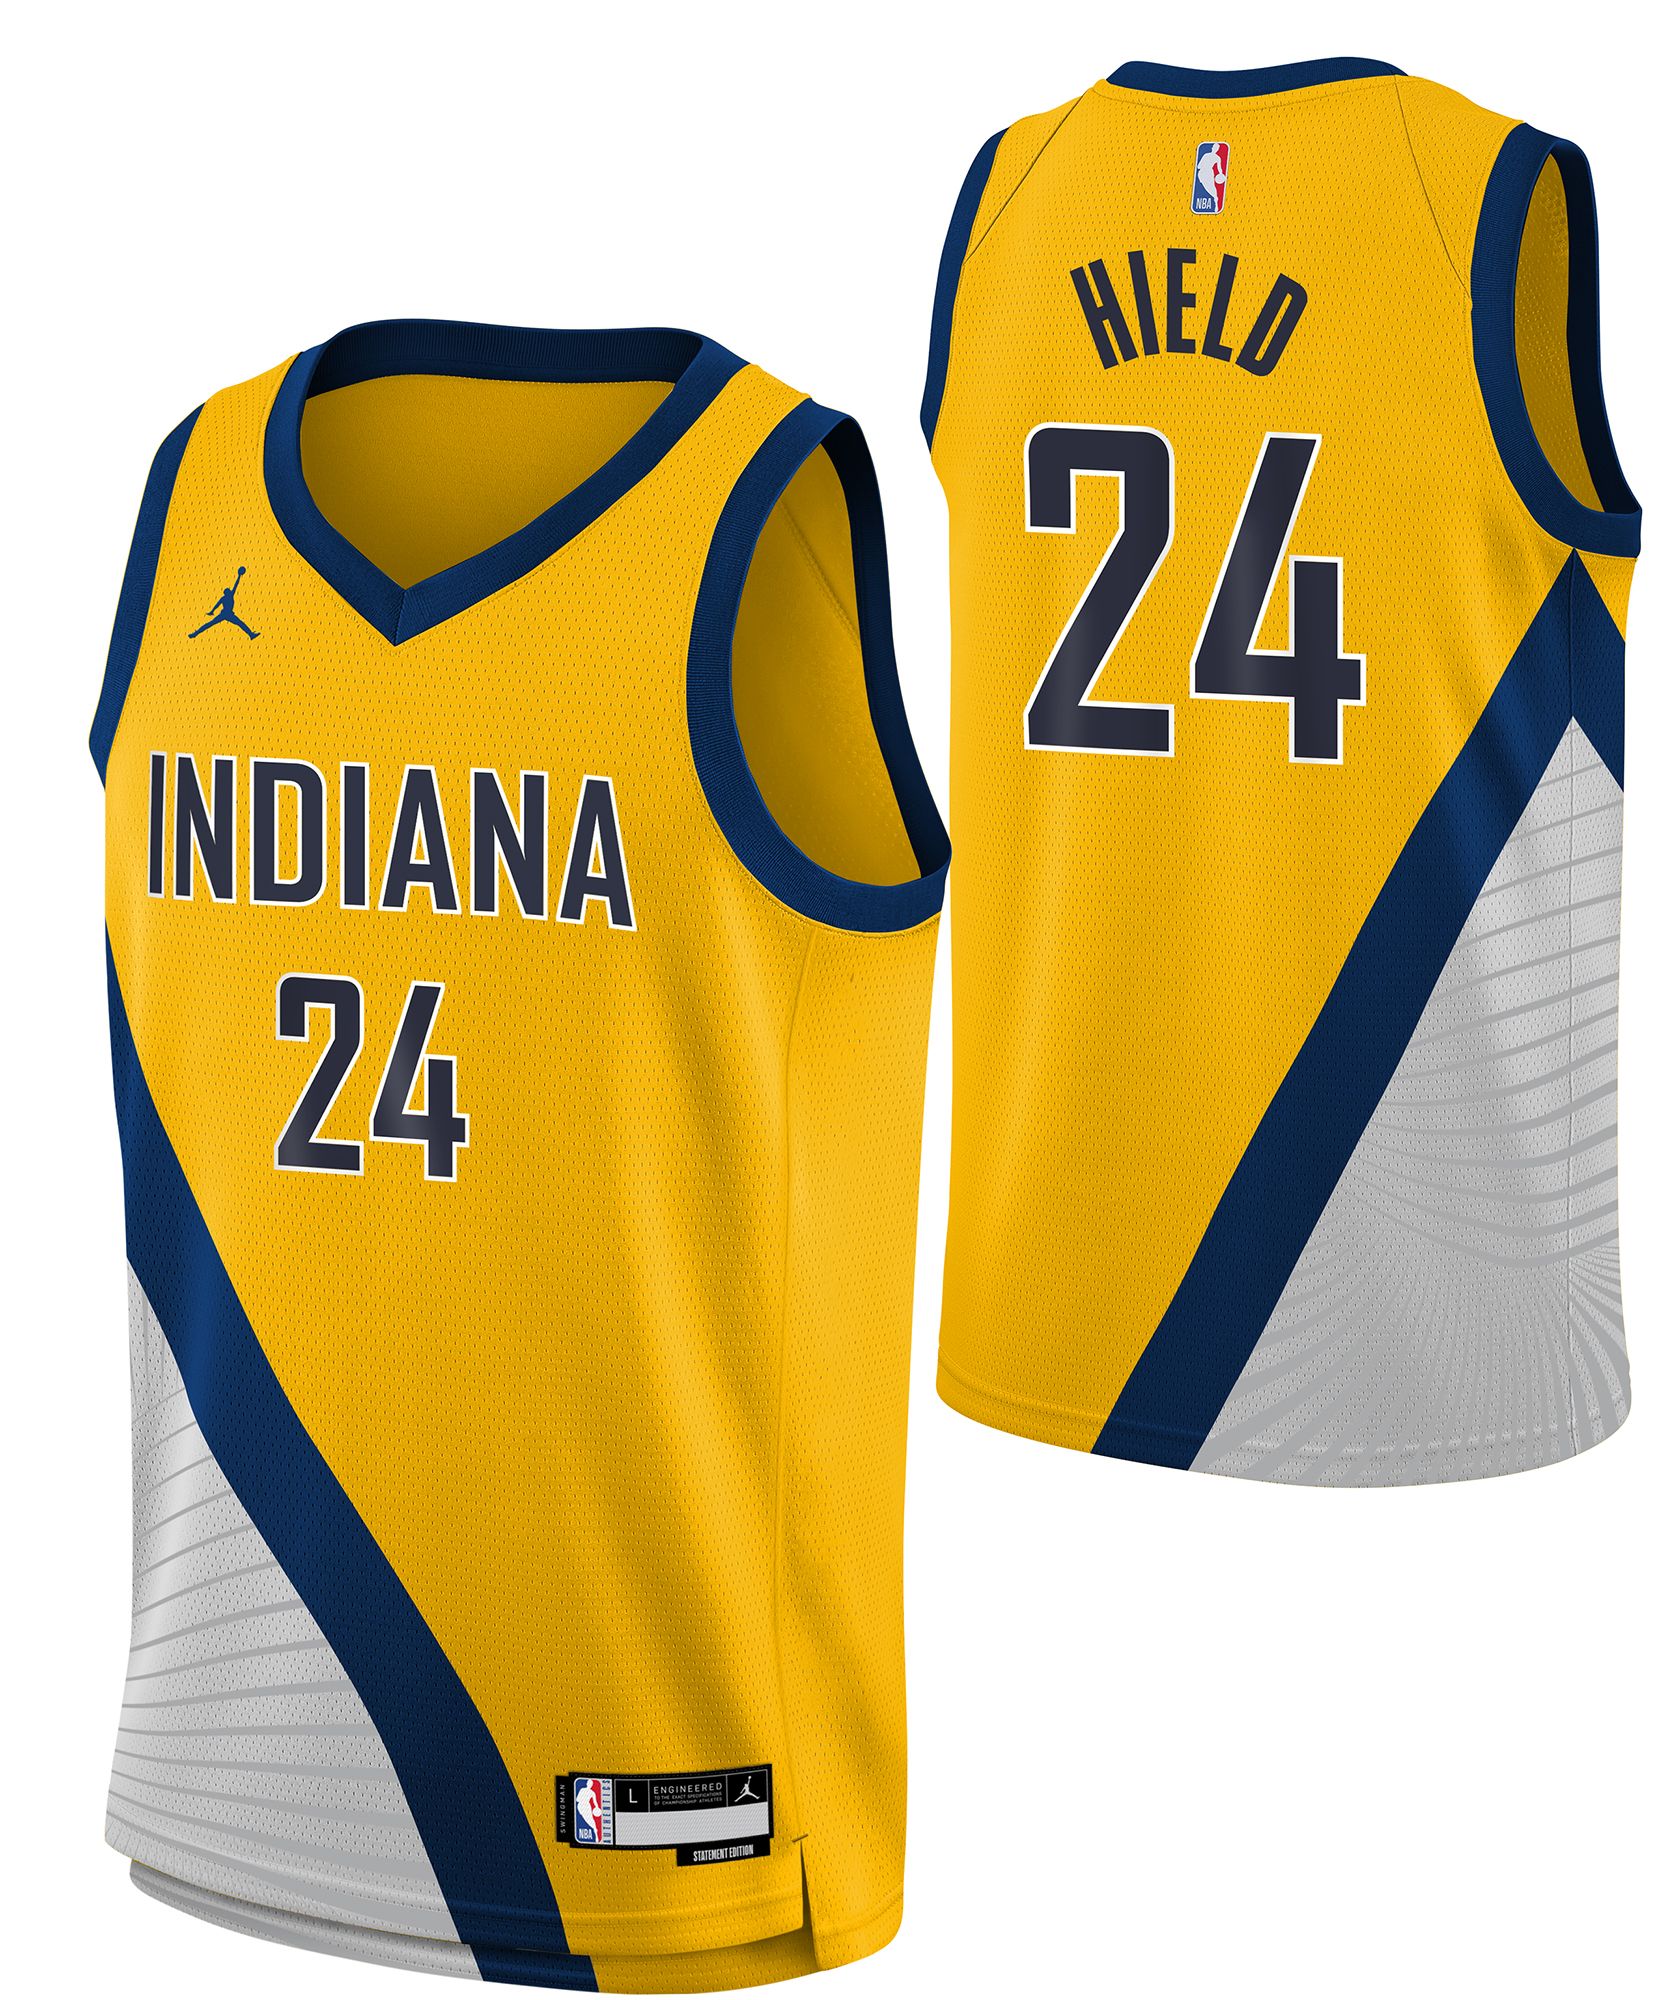 Pacers toddler jersey